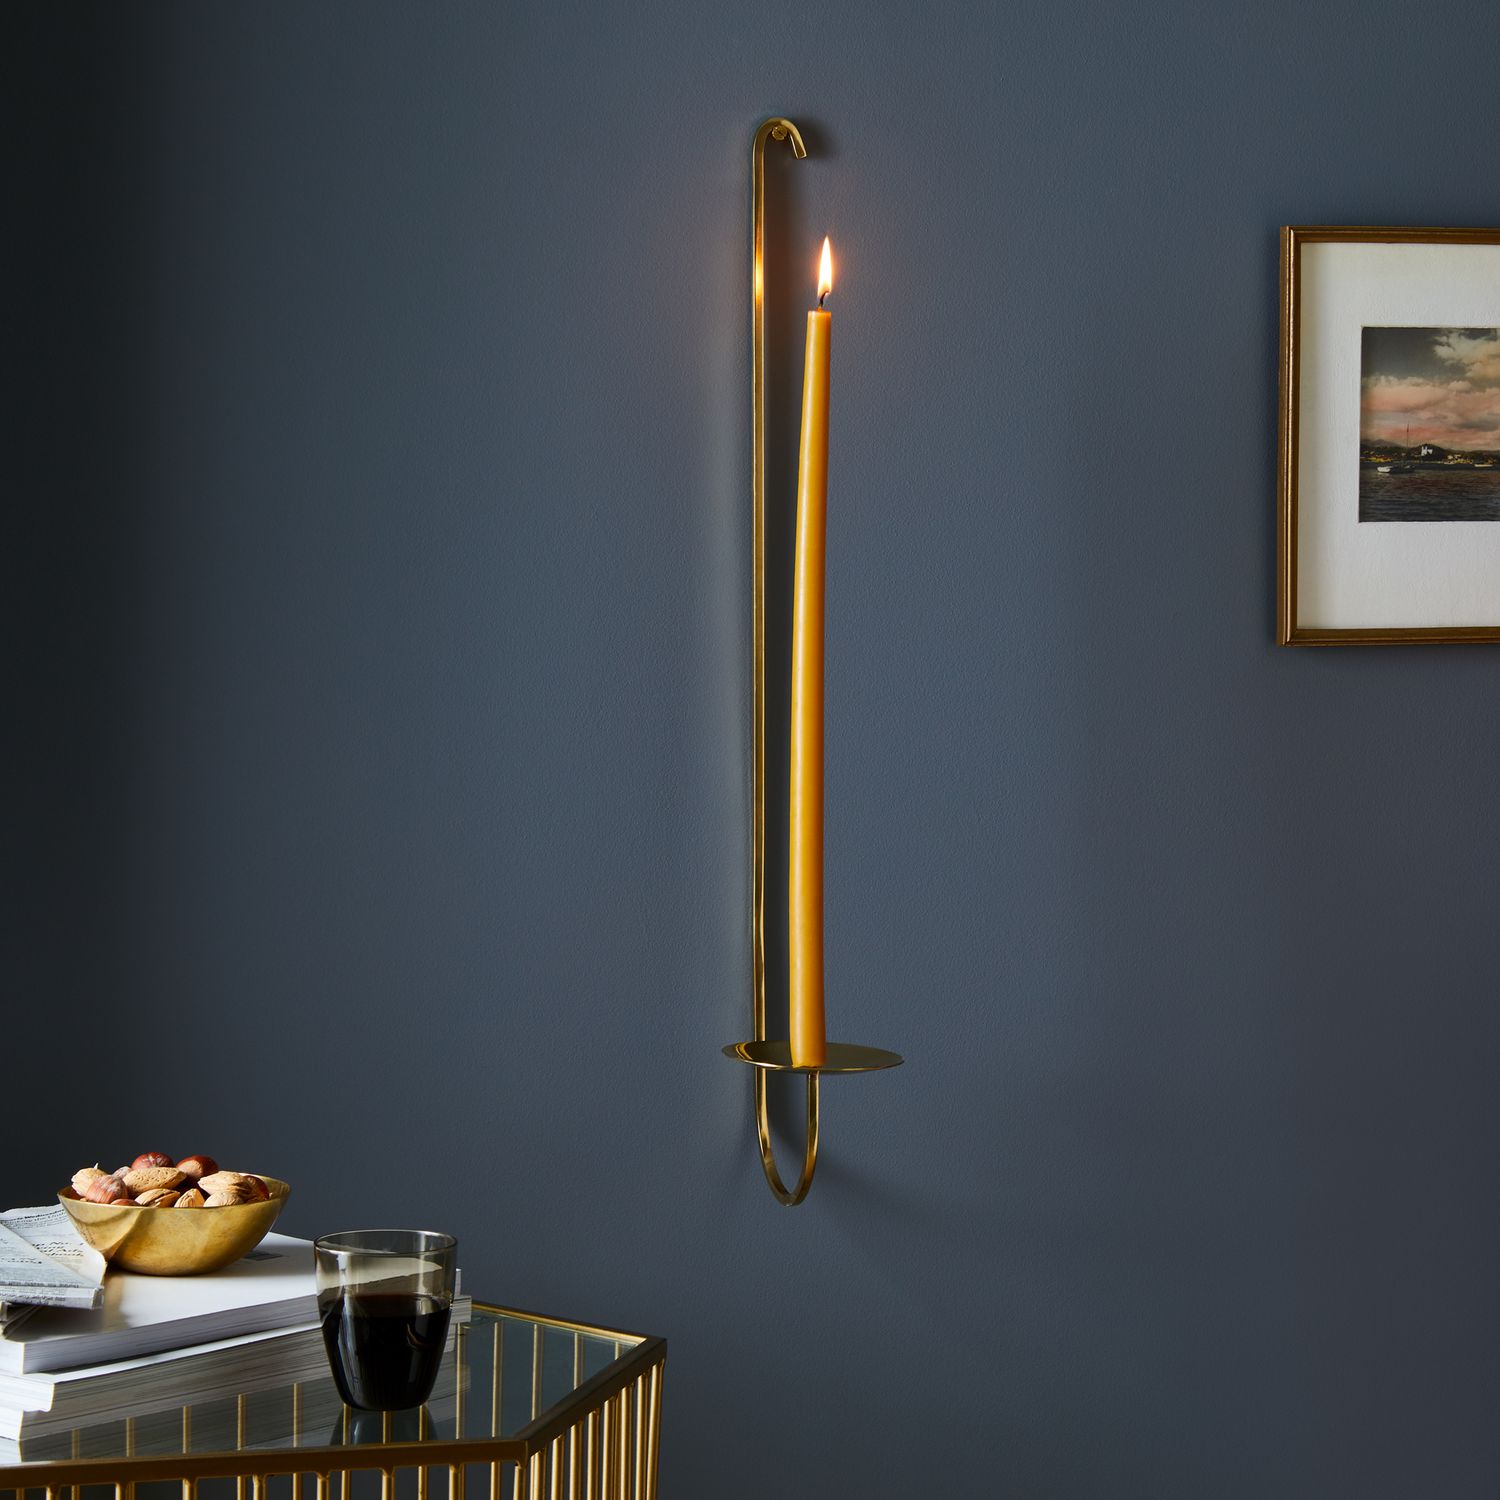 Fredericks & Mae Taper Candleholder Wall Sconce & Candles, 3 Sizes